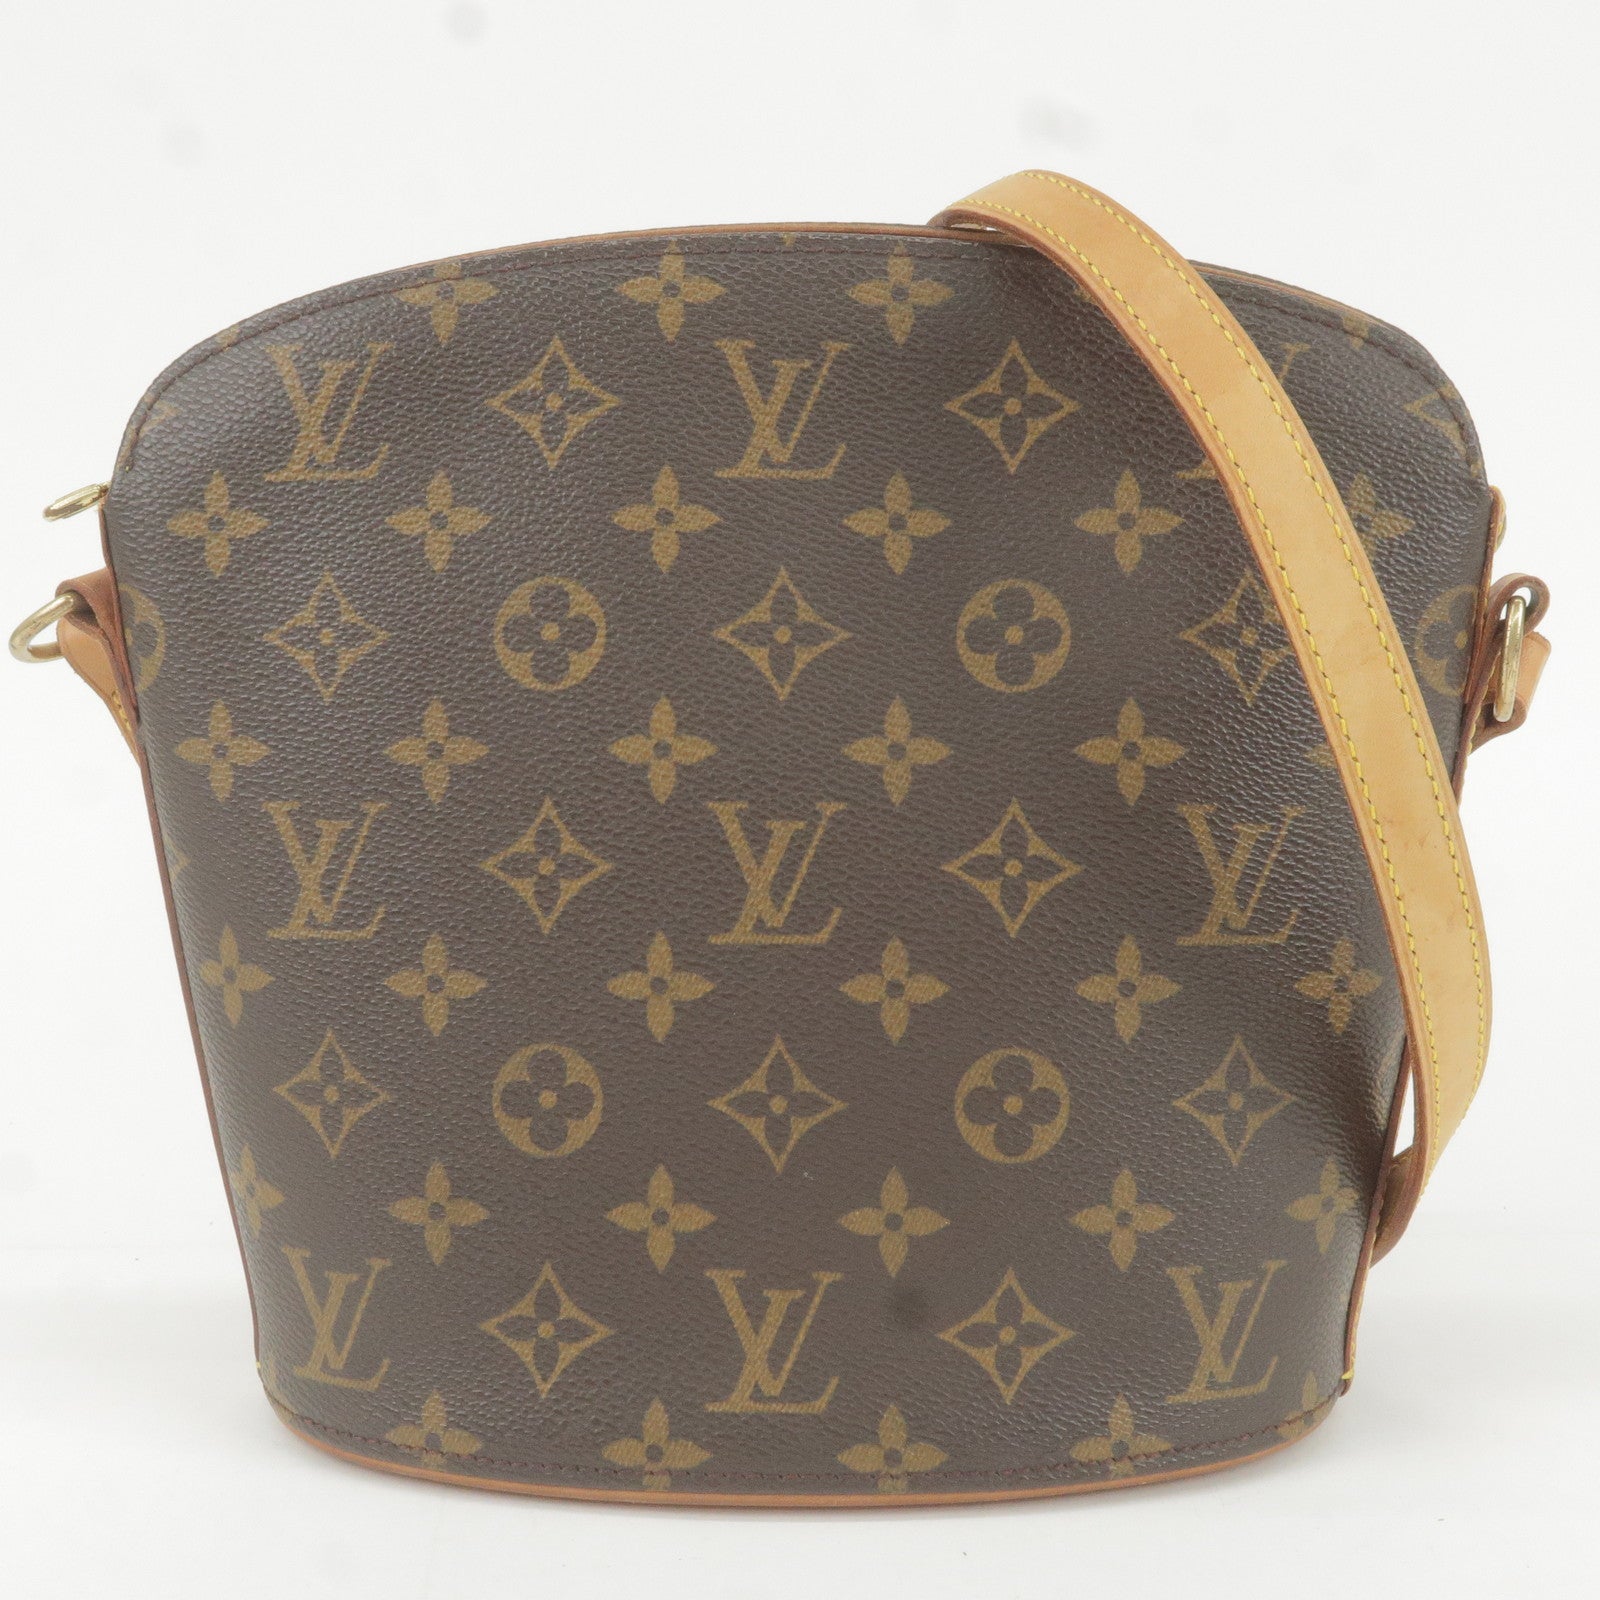 Louis Vuitton 2005 Pre-Owned Neo Speedy Tote Bag - Blue for Women